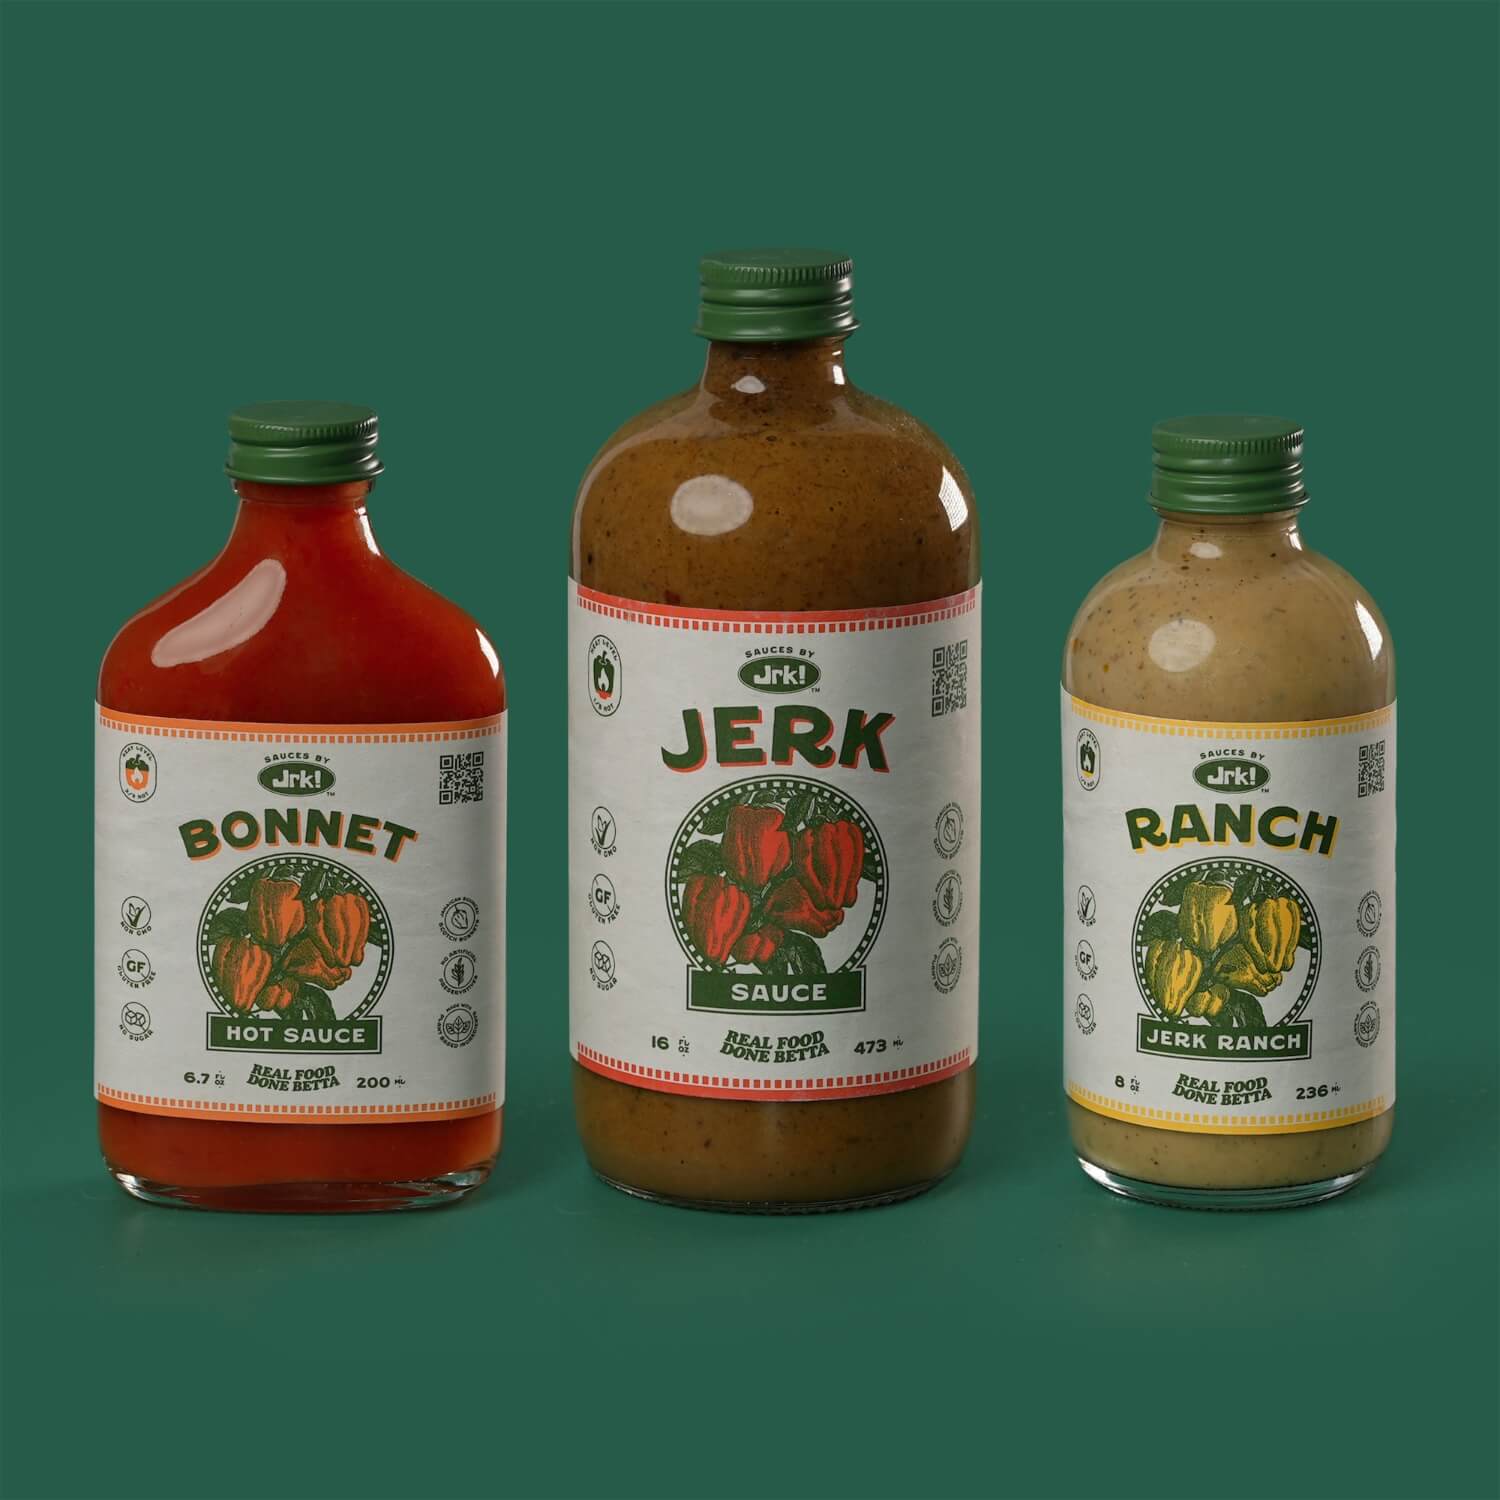 The Variety Pack - Sauces by Jrk!